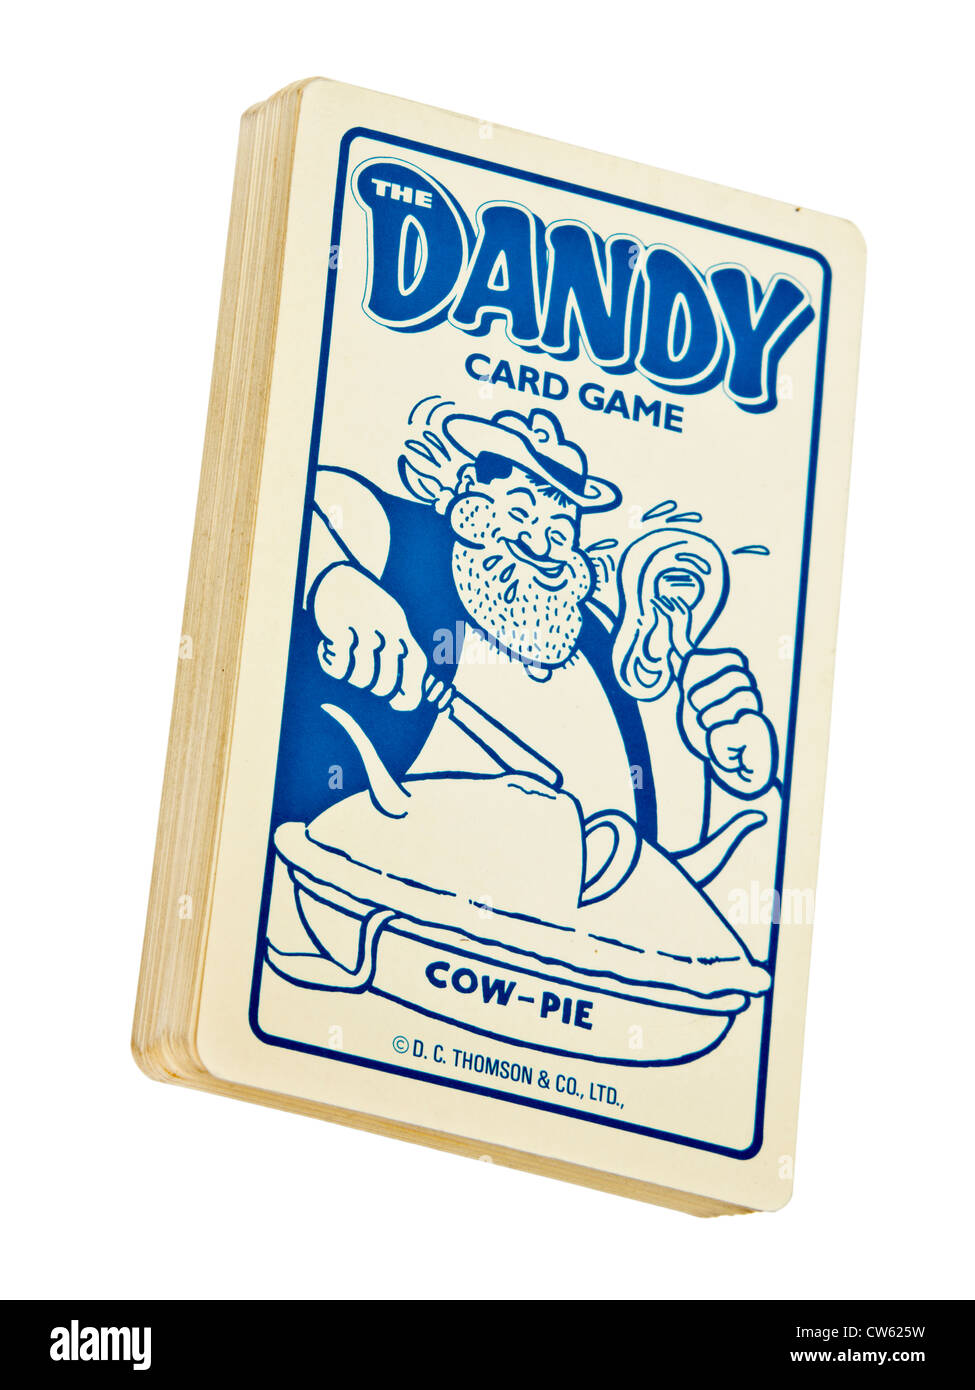 The Dandy Card Game by D.C. Thomson & Co Ltd Stock Photo